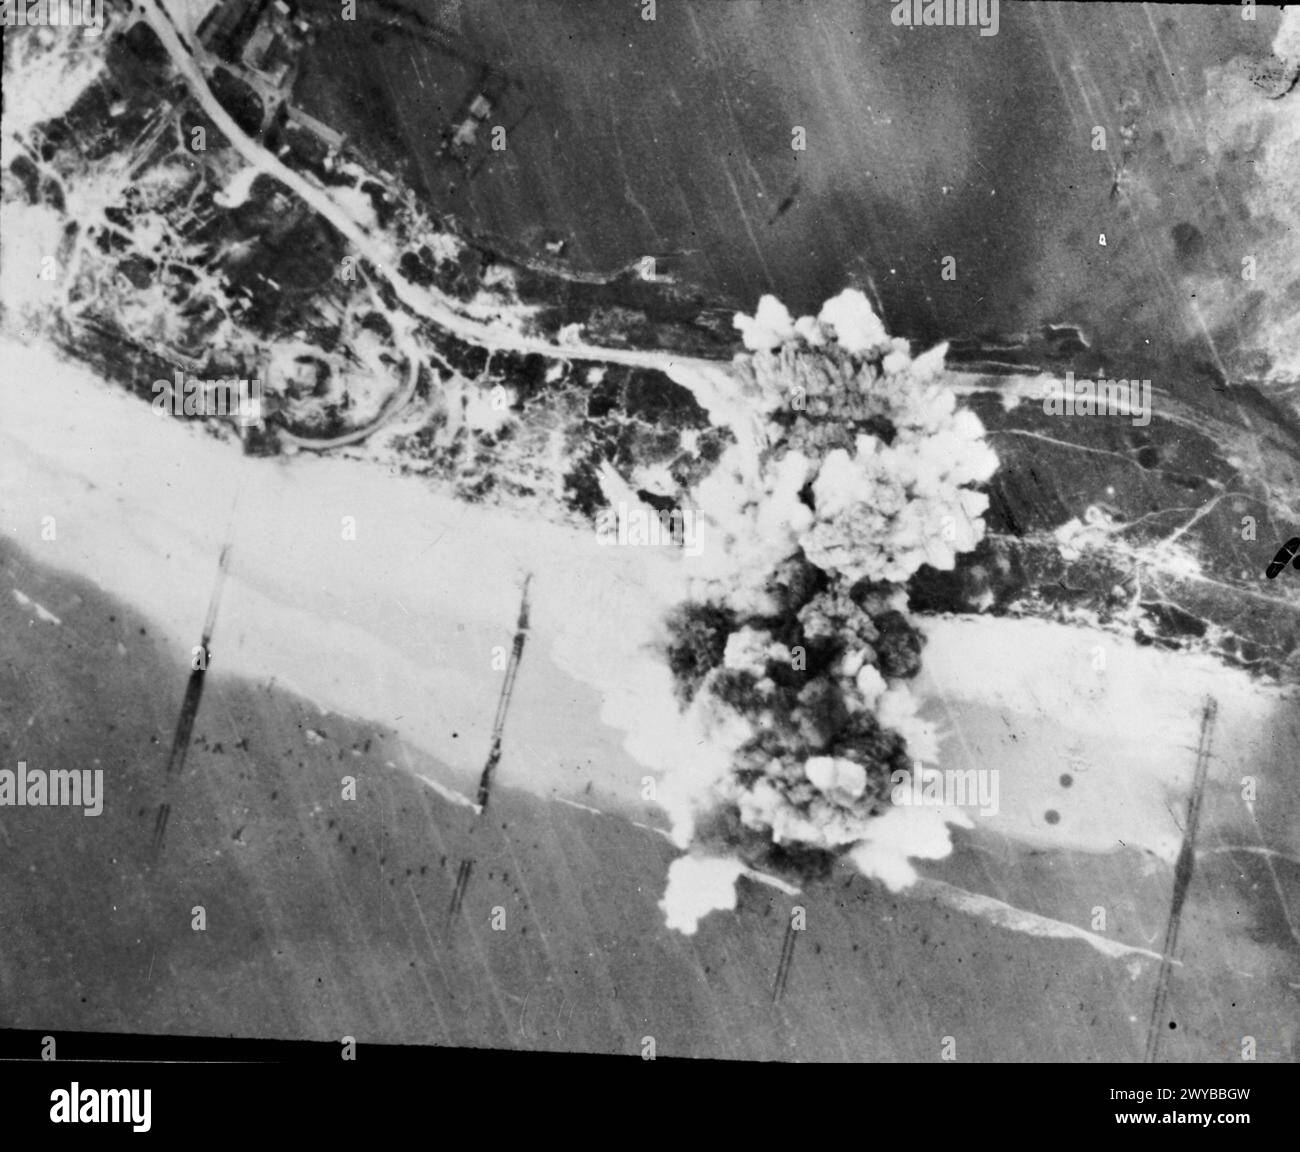 THE POLISH AIR FORCE IN THE NORTH-WEST EUROPE CAMPAIGN, 1944-1945 - What the Spitfire dive-bombers could do. Explosions straddle German flak positions close to the shoreline on Walcheren Island, 30 October 1944.This attack, carried out by Spitfire XVIs of one of the squadrons of the No. 131 (Polish) Wing, was part of a sustained 'softening-up' campaign by No. 84 Group and the bomber forces in advance of an amphibious assualt on the fortified island. , Polish Air Force, 131 Polish Fighter Wing, Royal Air Force, Group, 84 Stock Photo